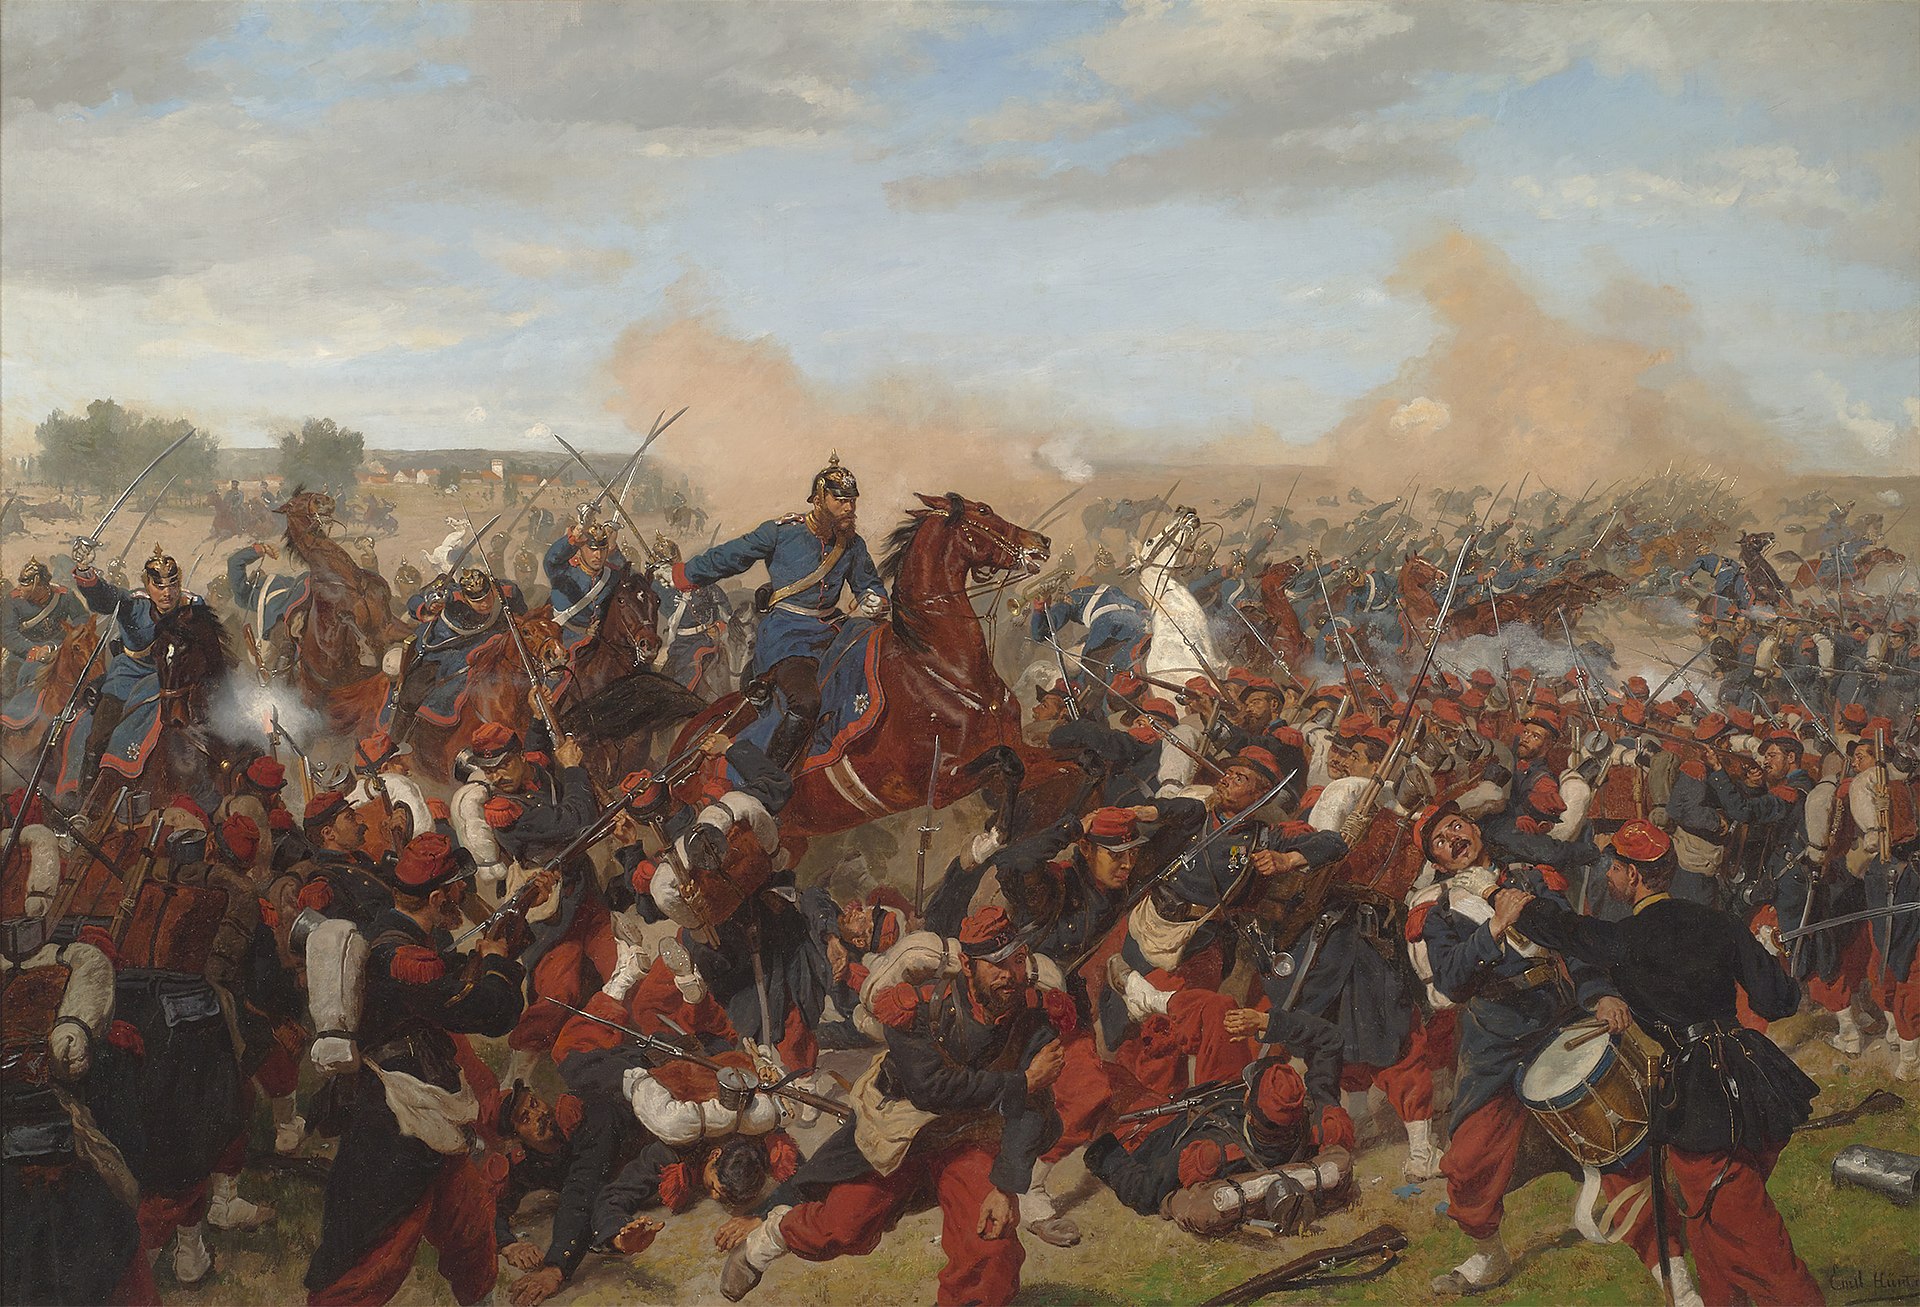 A bloody battle from August 1870 depicted in "The Battle of Mars-La-Tour" by Emil Hünten.